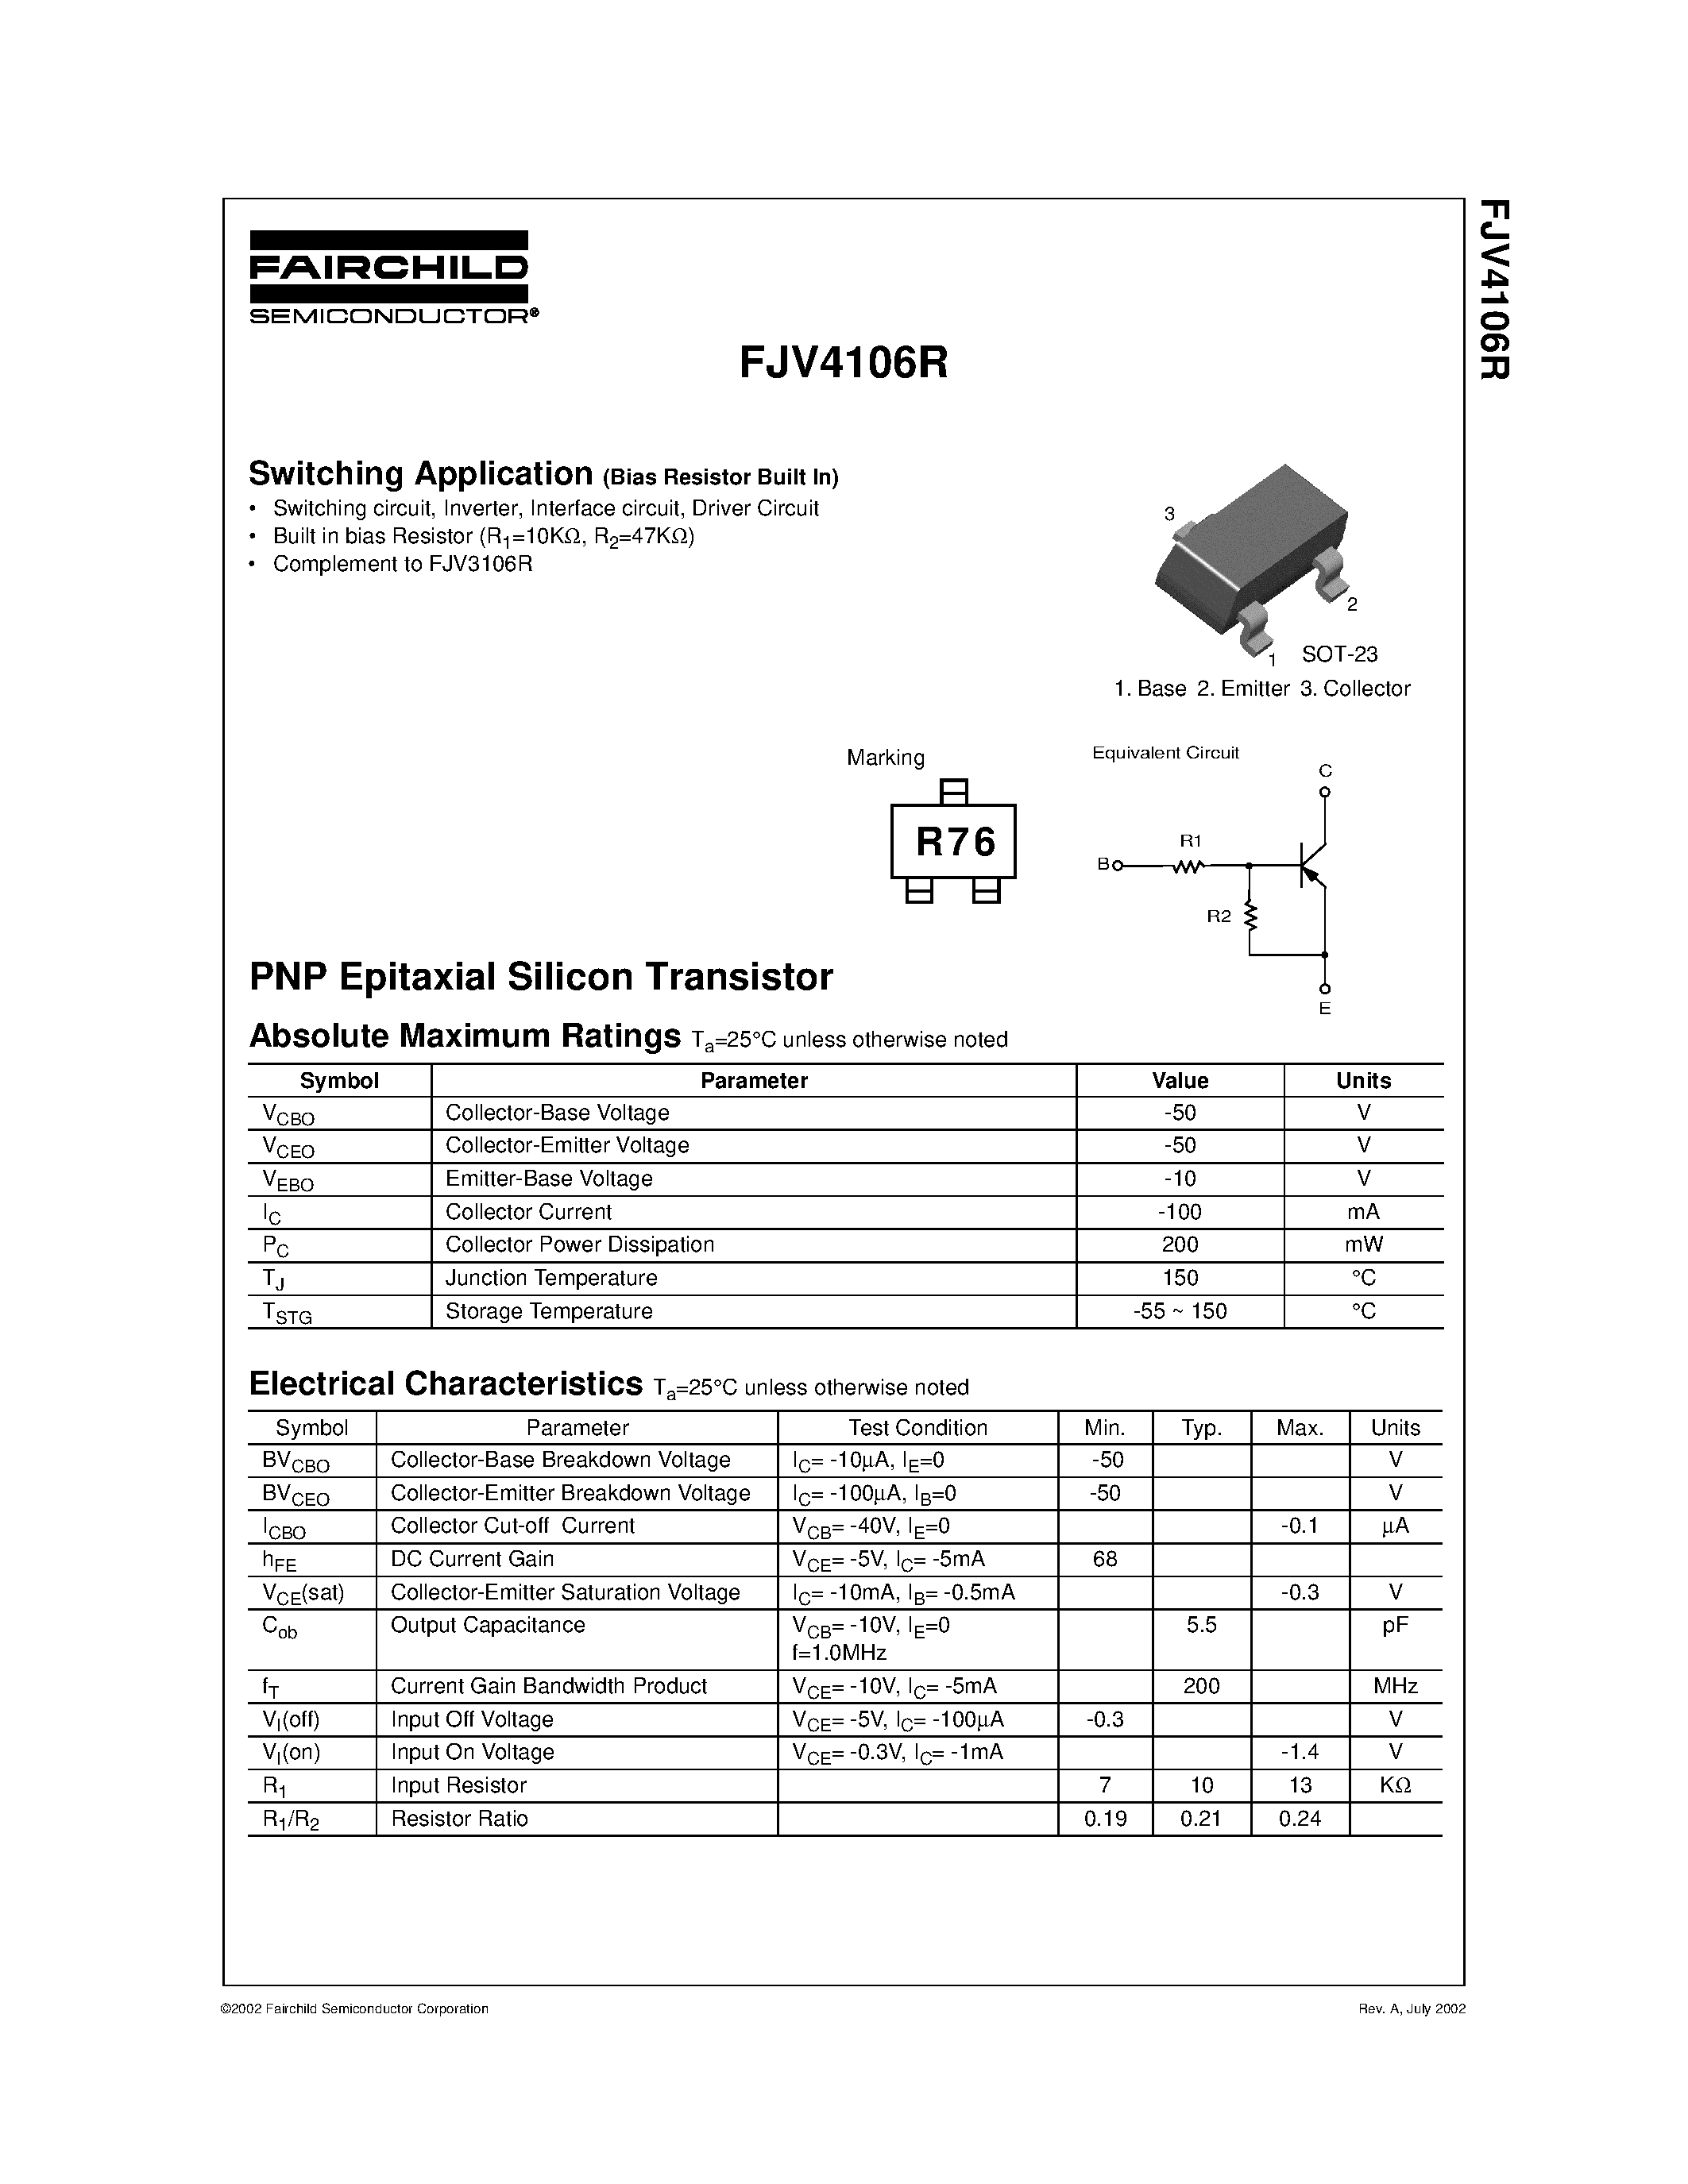 Datasheet FJV4106R - PNP Epitaxial Silicon Transistor page 1